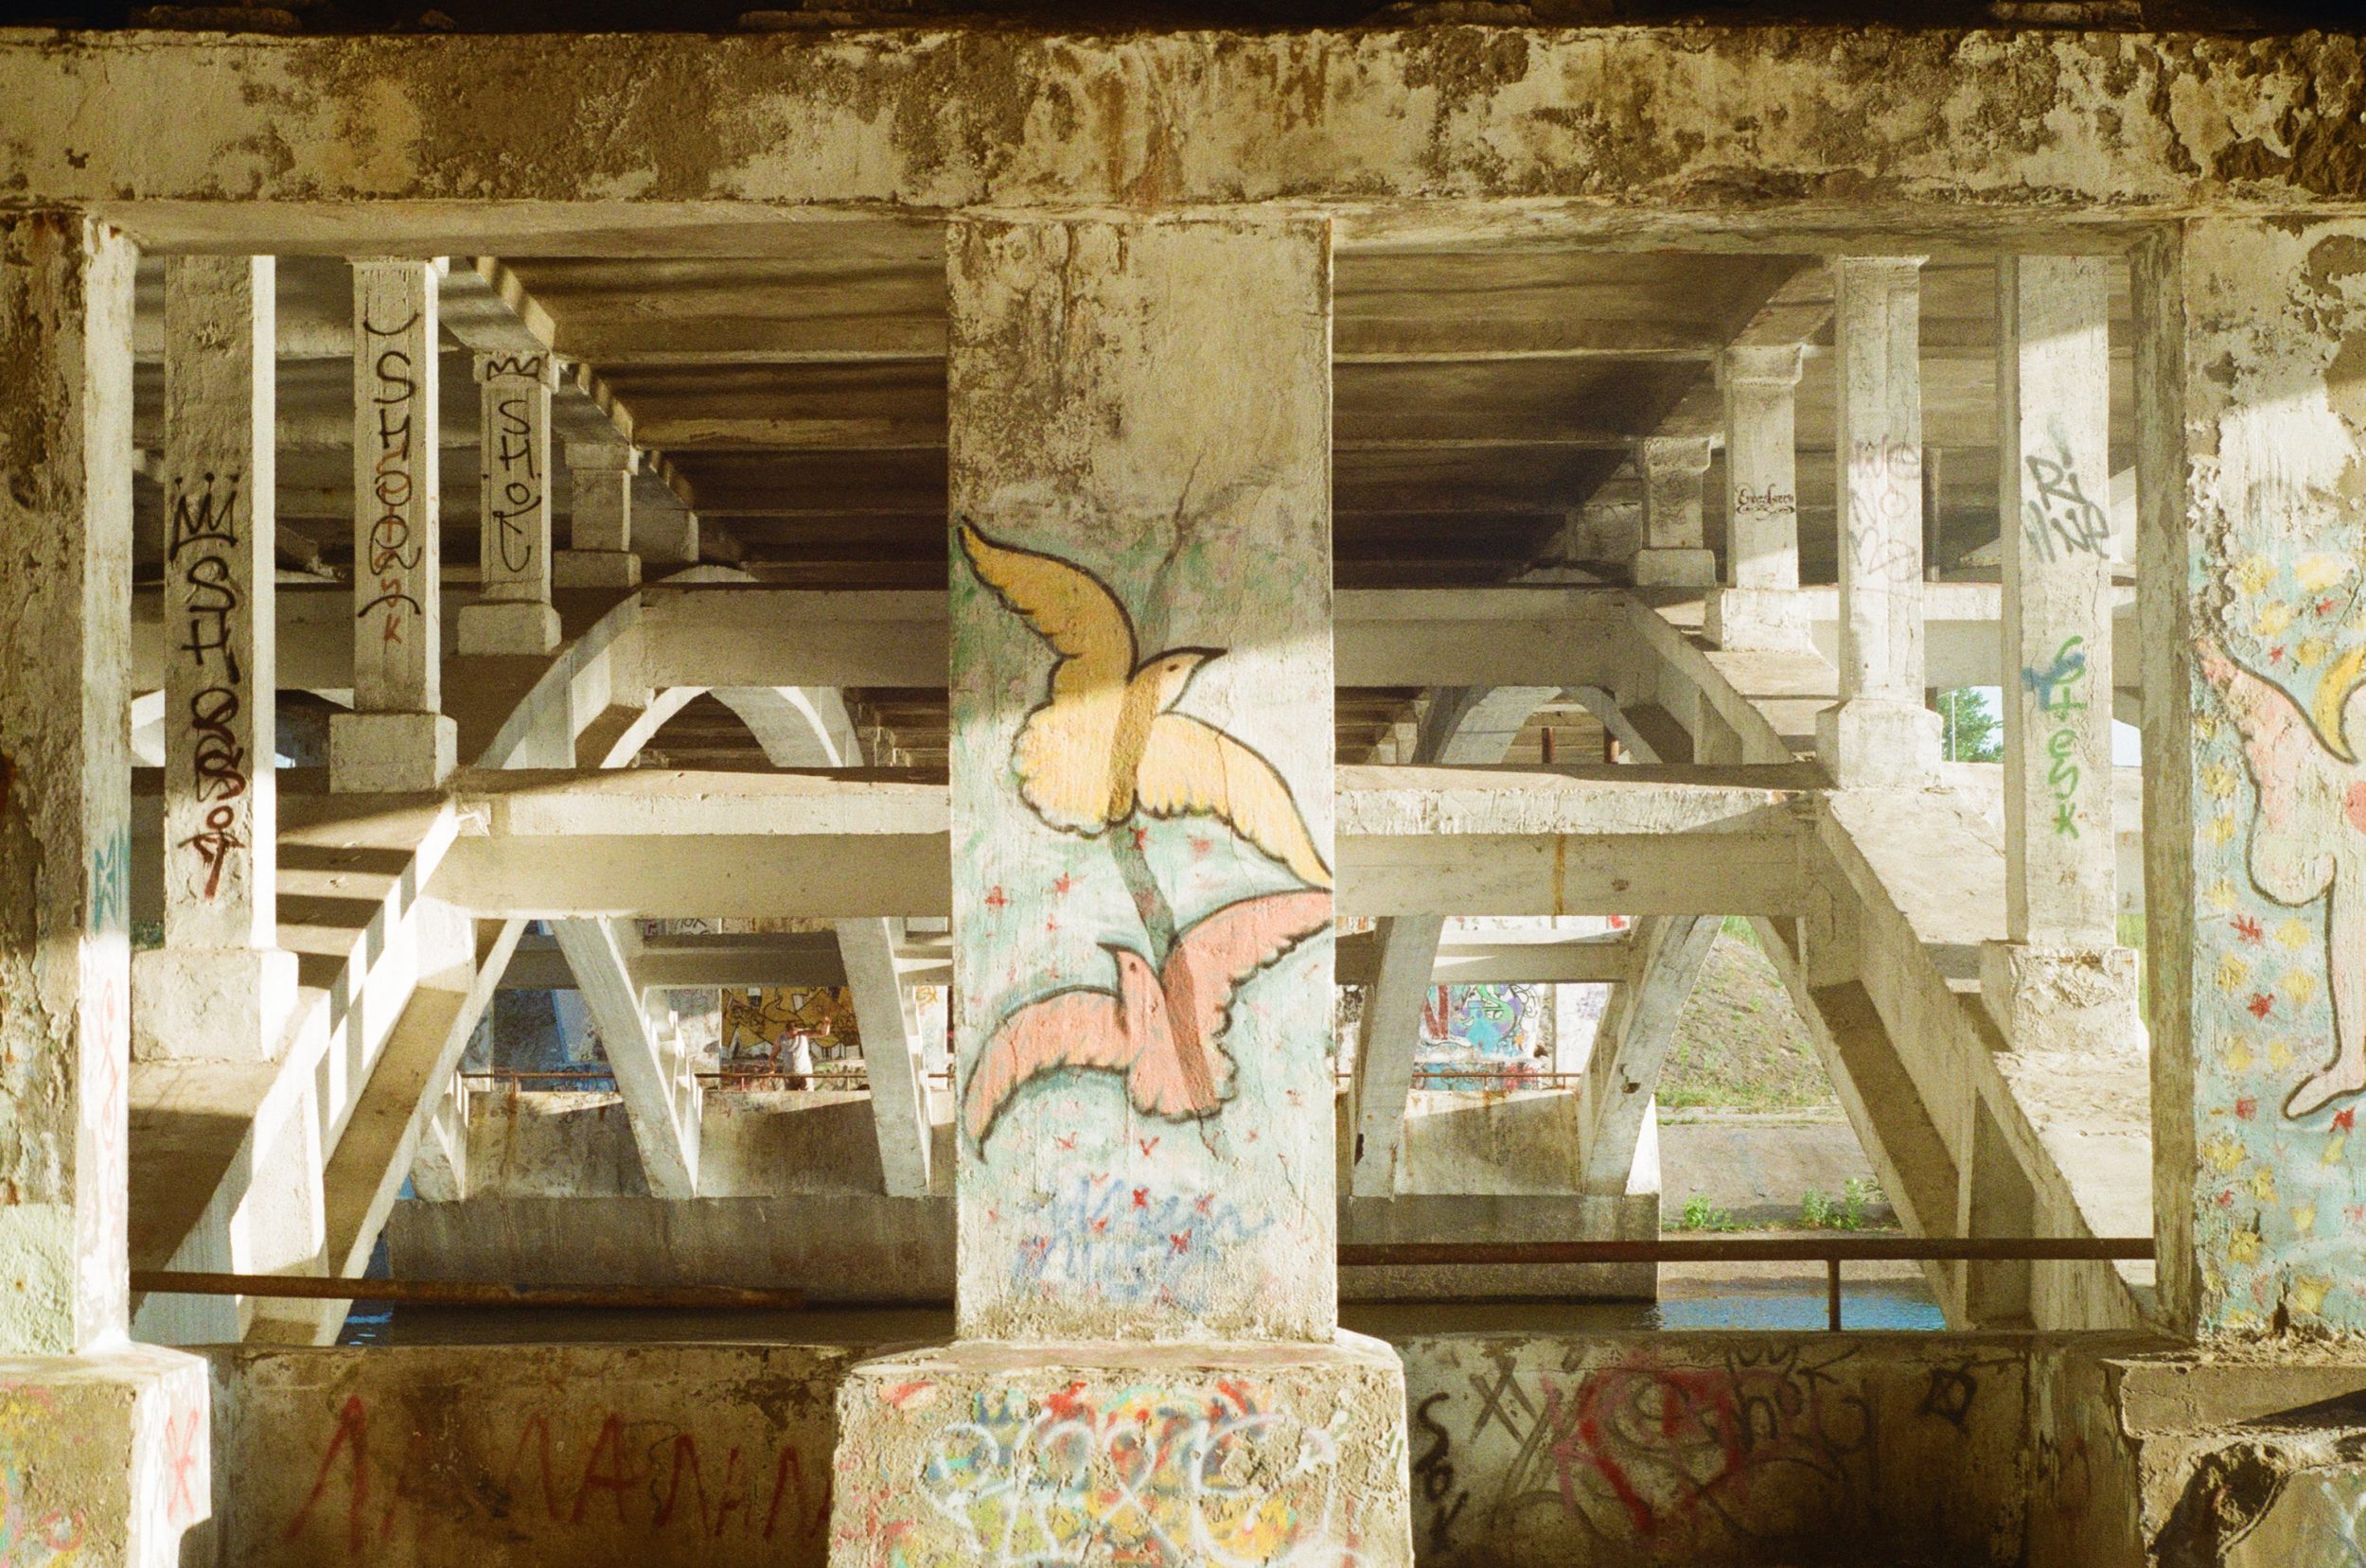 Header image depicting two hand-drawn doves on a pillar under a bridge.